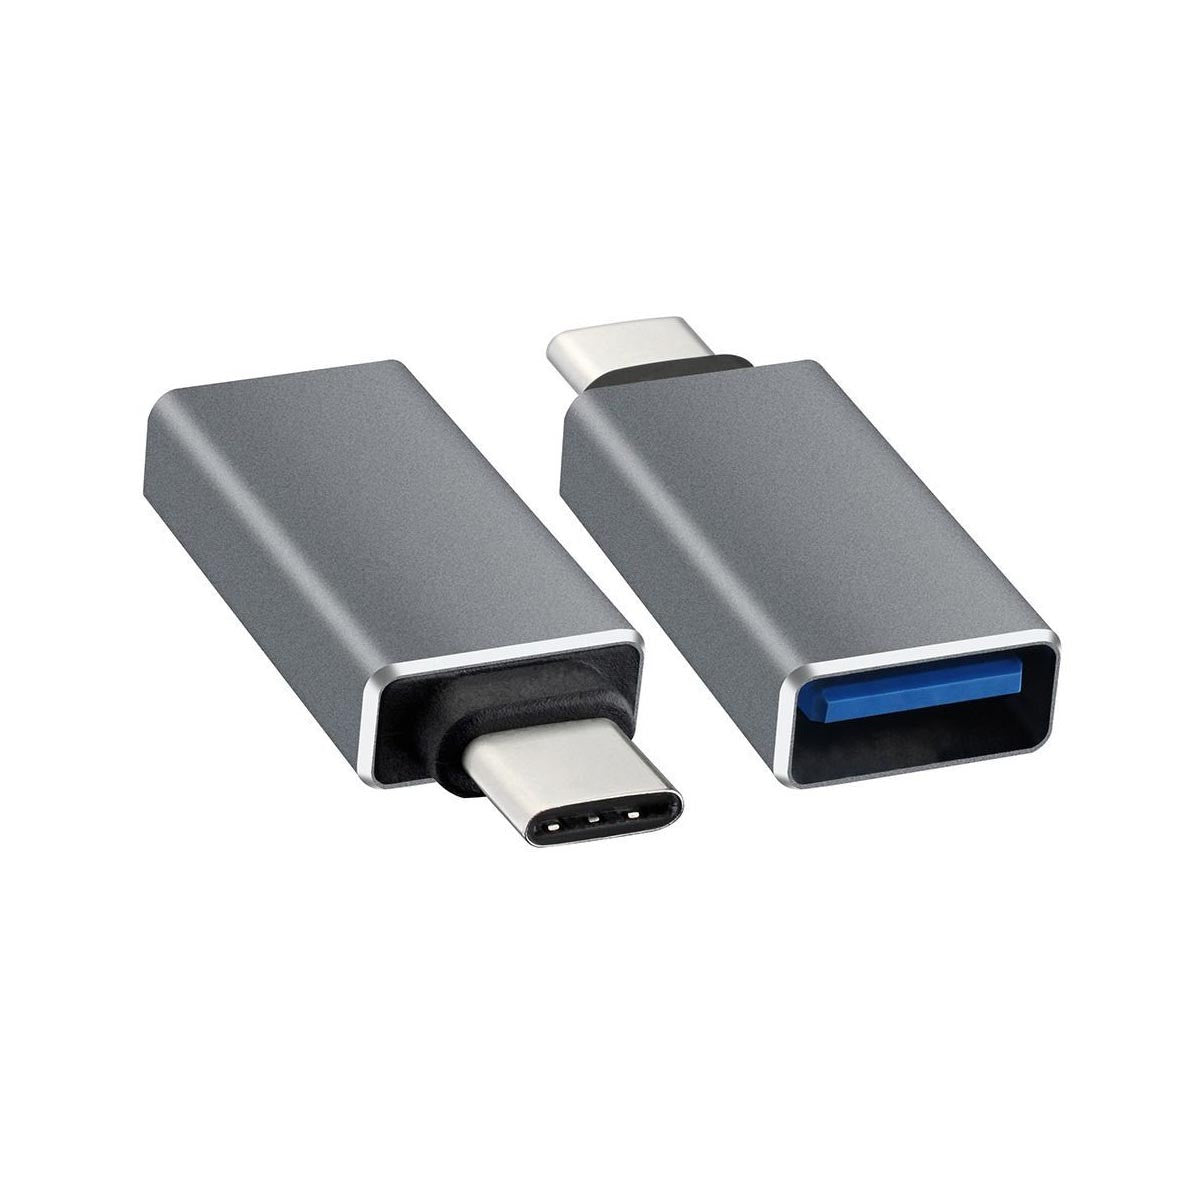 Mobile Mob USB-C 3.1 to USB 3.0 Female Adapter Connector for MacBook Default  